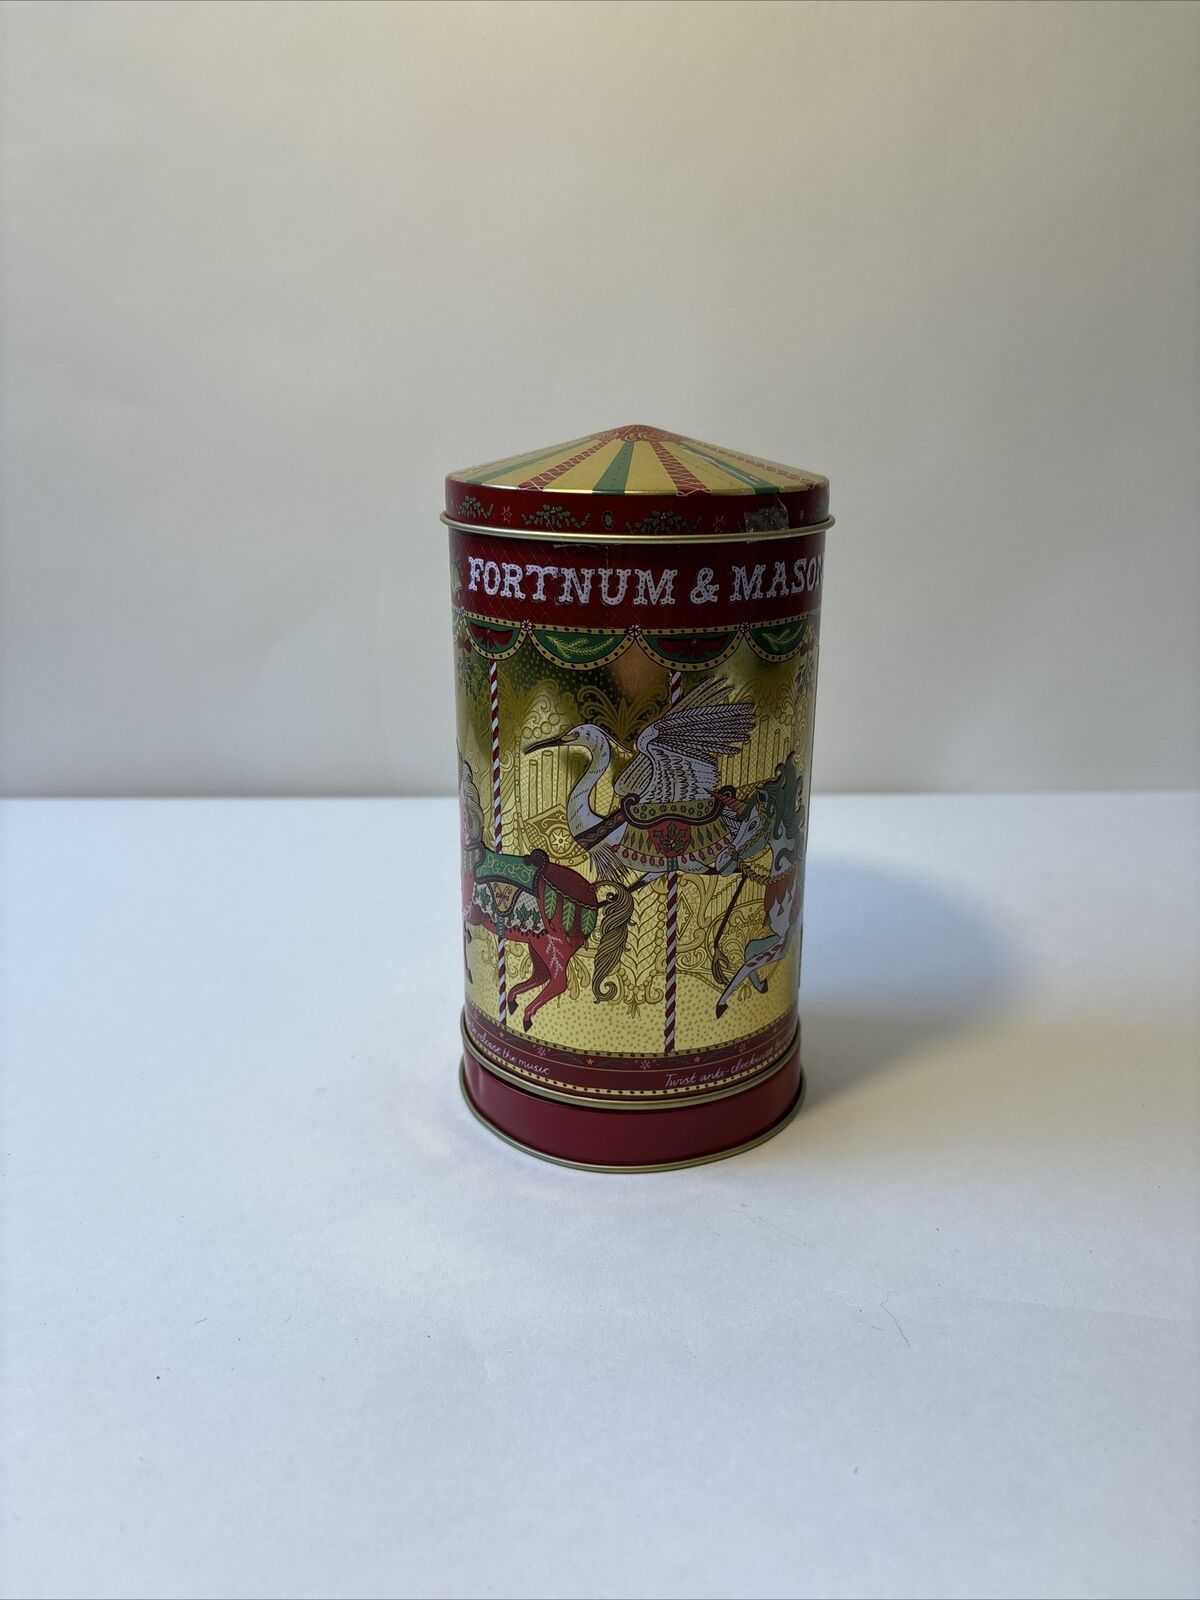 The Christmas Mini Musical Merry Go Round Fortnum And Mason Empty Tin - Works